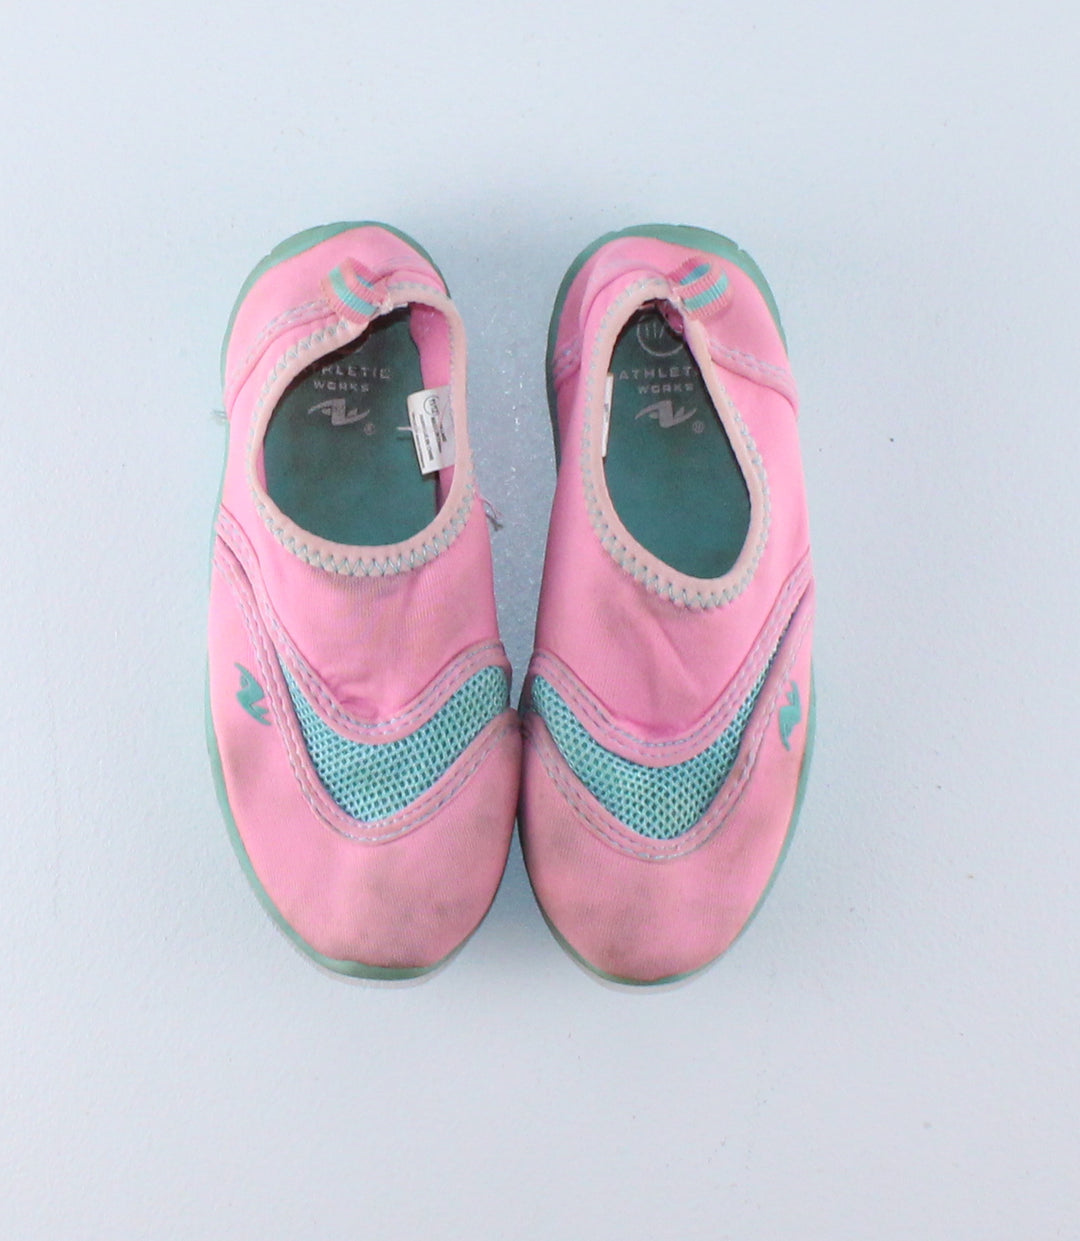 ATHLETIC WORKS WATER SHOES PINK/TEAL 11/12 VGUC/PC